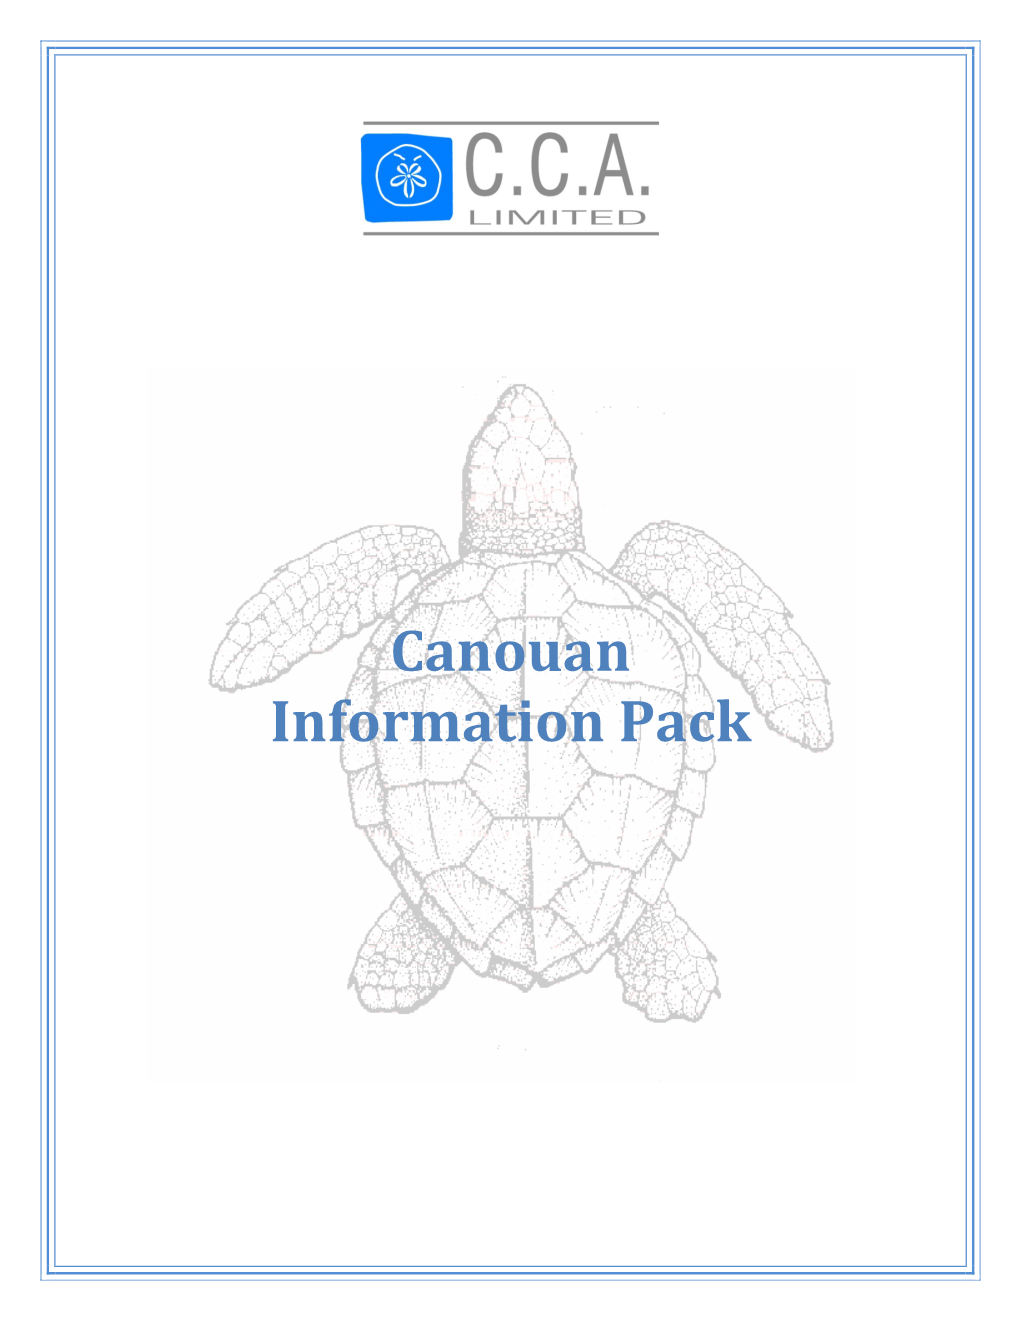 Canouan Information Pack